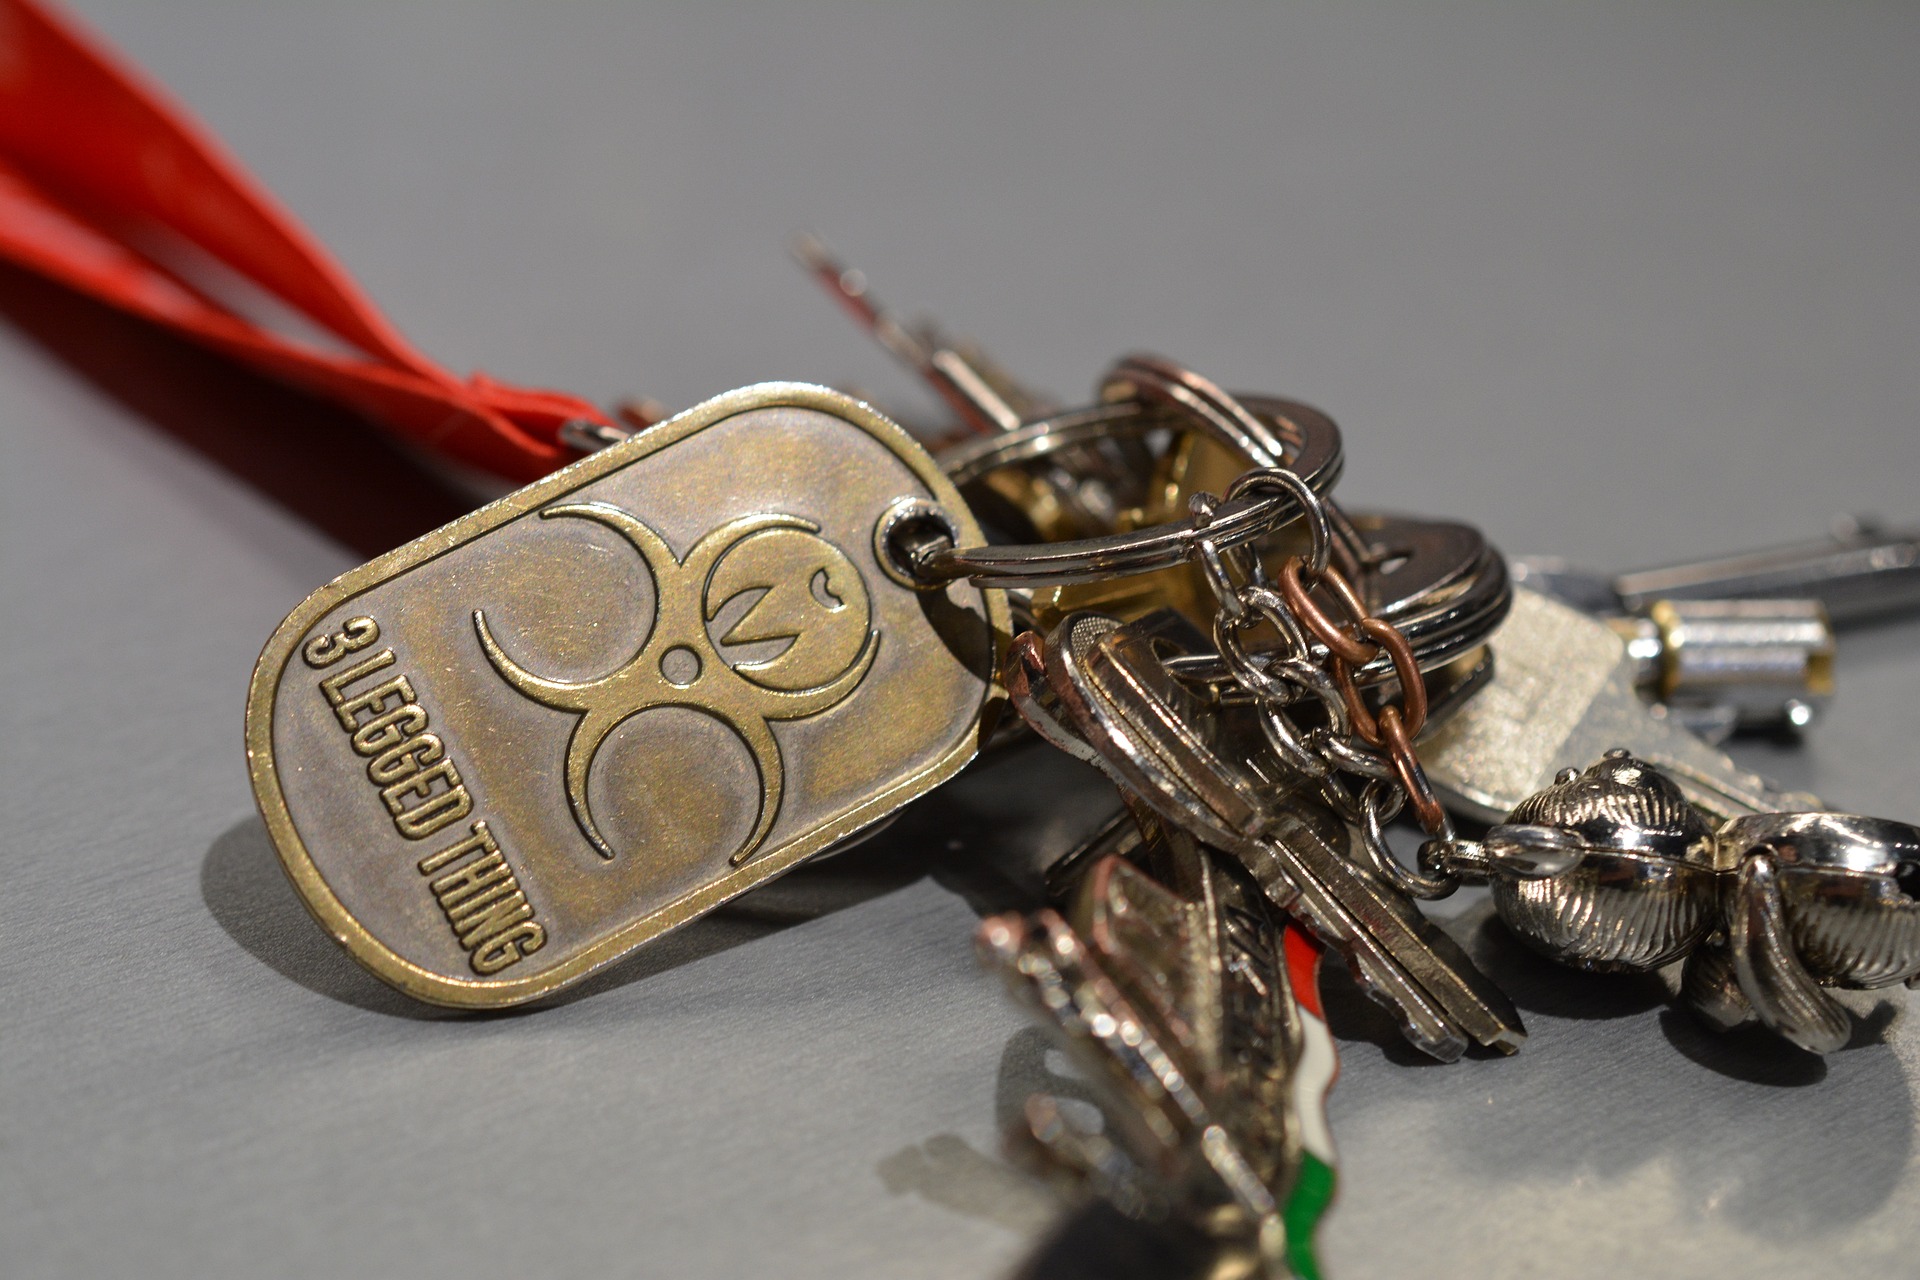 CUSTOM CORPORATE KEYRINGS: EVERYTHING YOU NEED TO KNOW